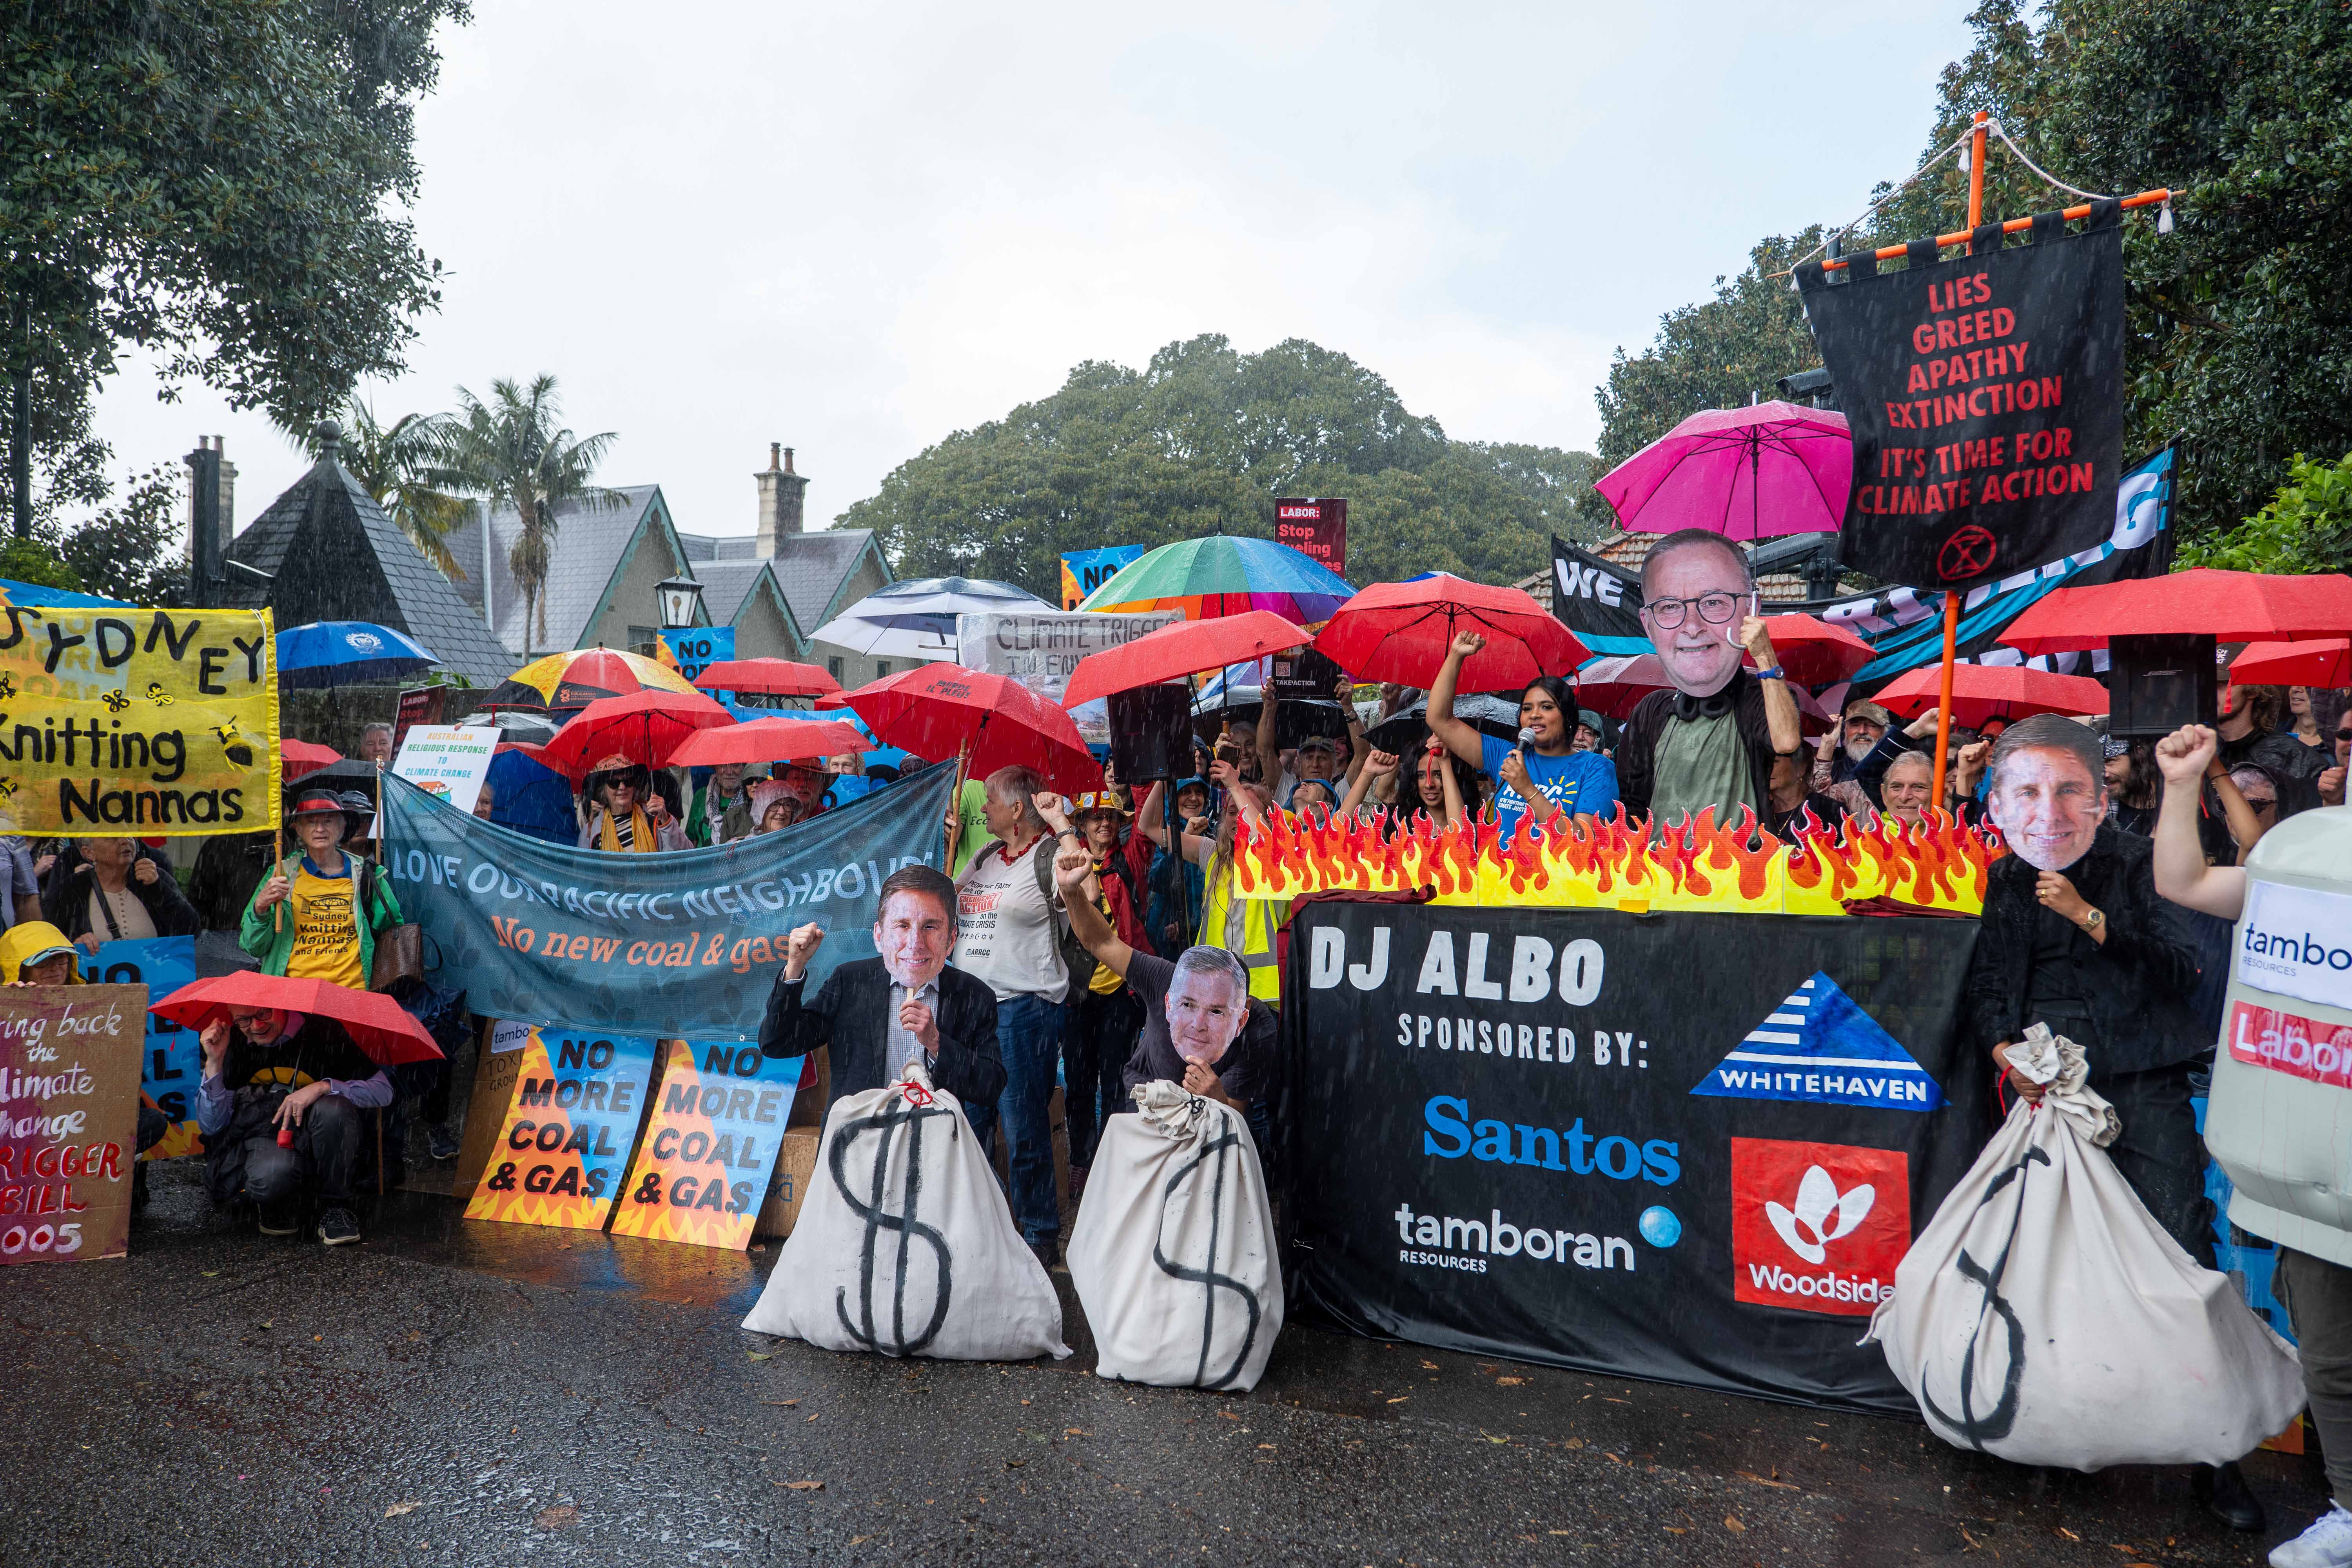 D.J. ALBO and Friends outside his house at Kirribilli Photo: Rise Up Gadigal